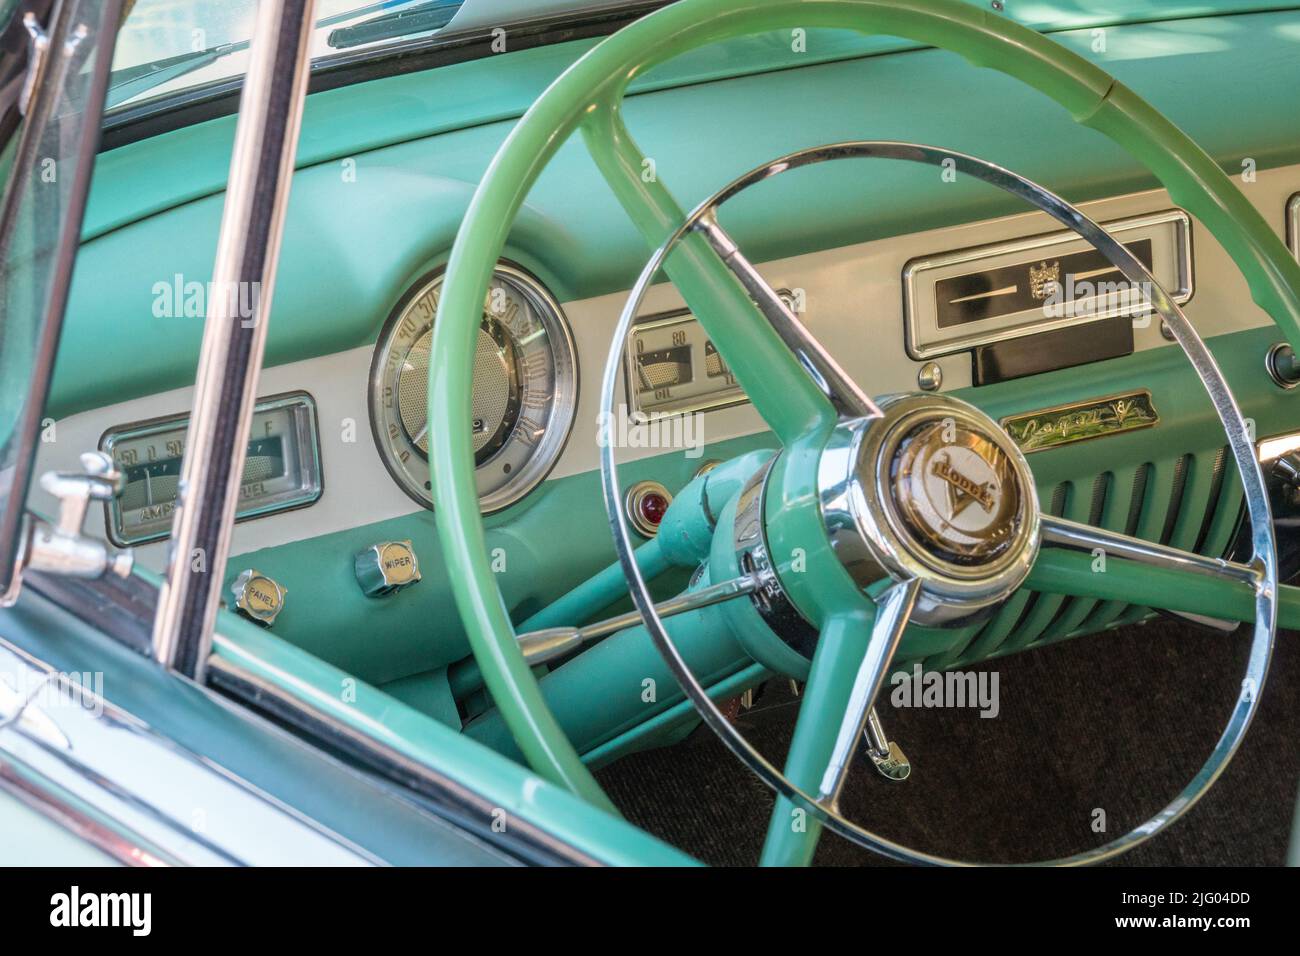 Andover, MA, US-June 26, 2022: Close-up view of the steering wheel in a pastel green 1950s - 1960s era Dodge classic car. Stock Photo